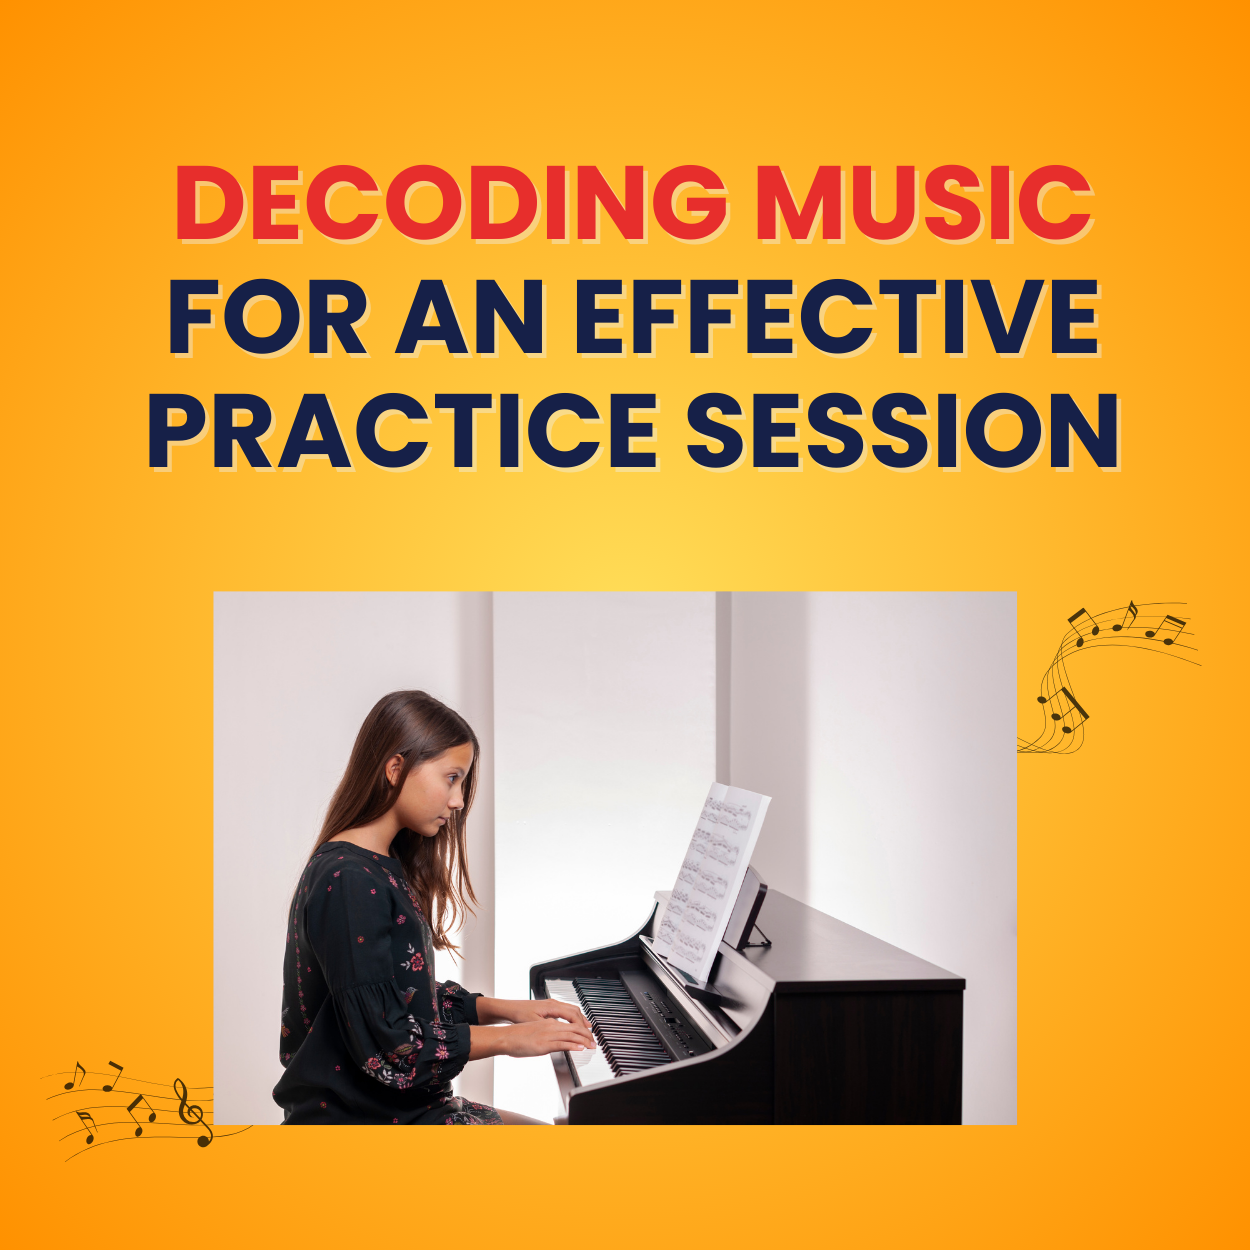 Decoding Music for an Effective Practice Session